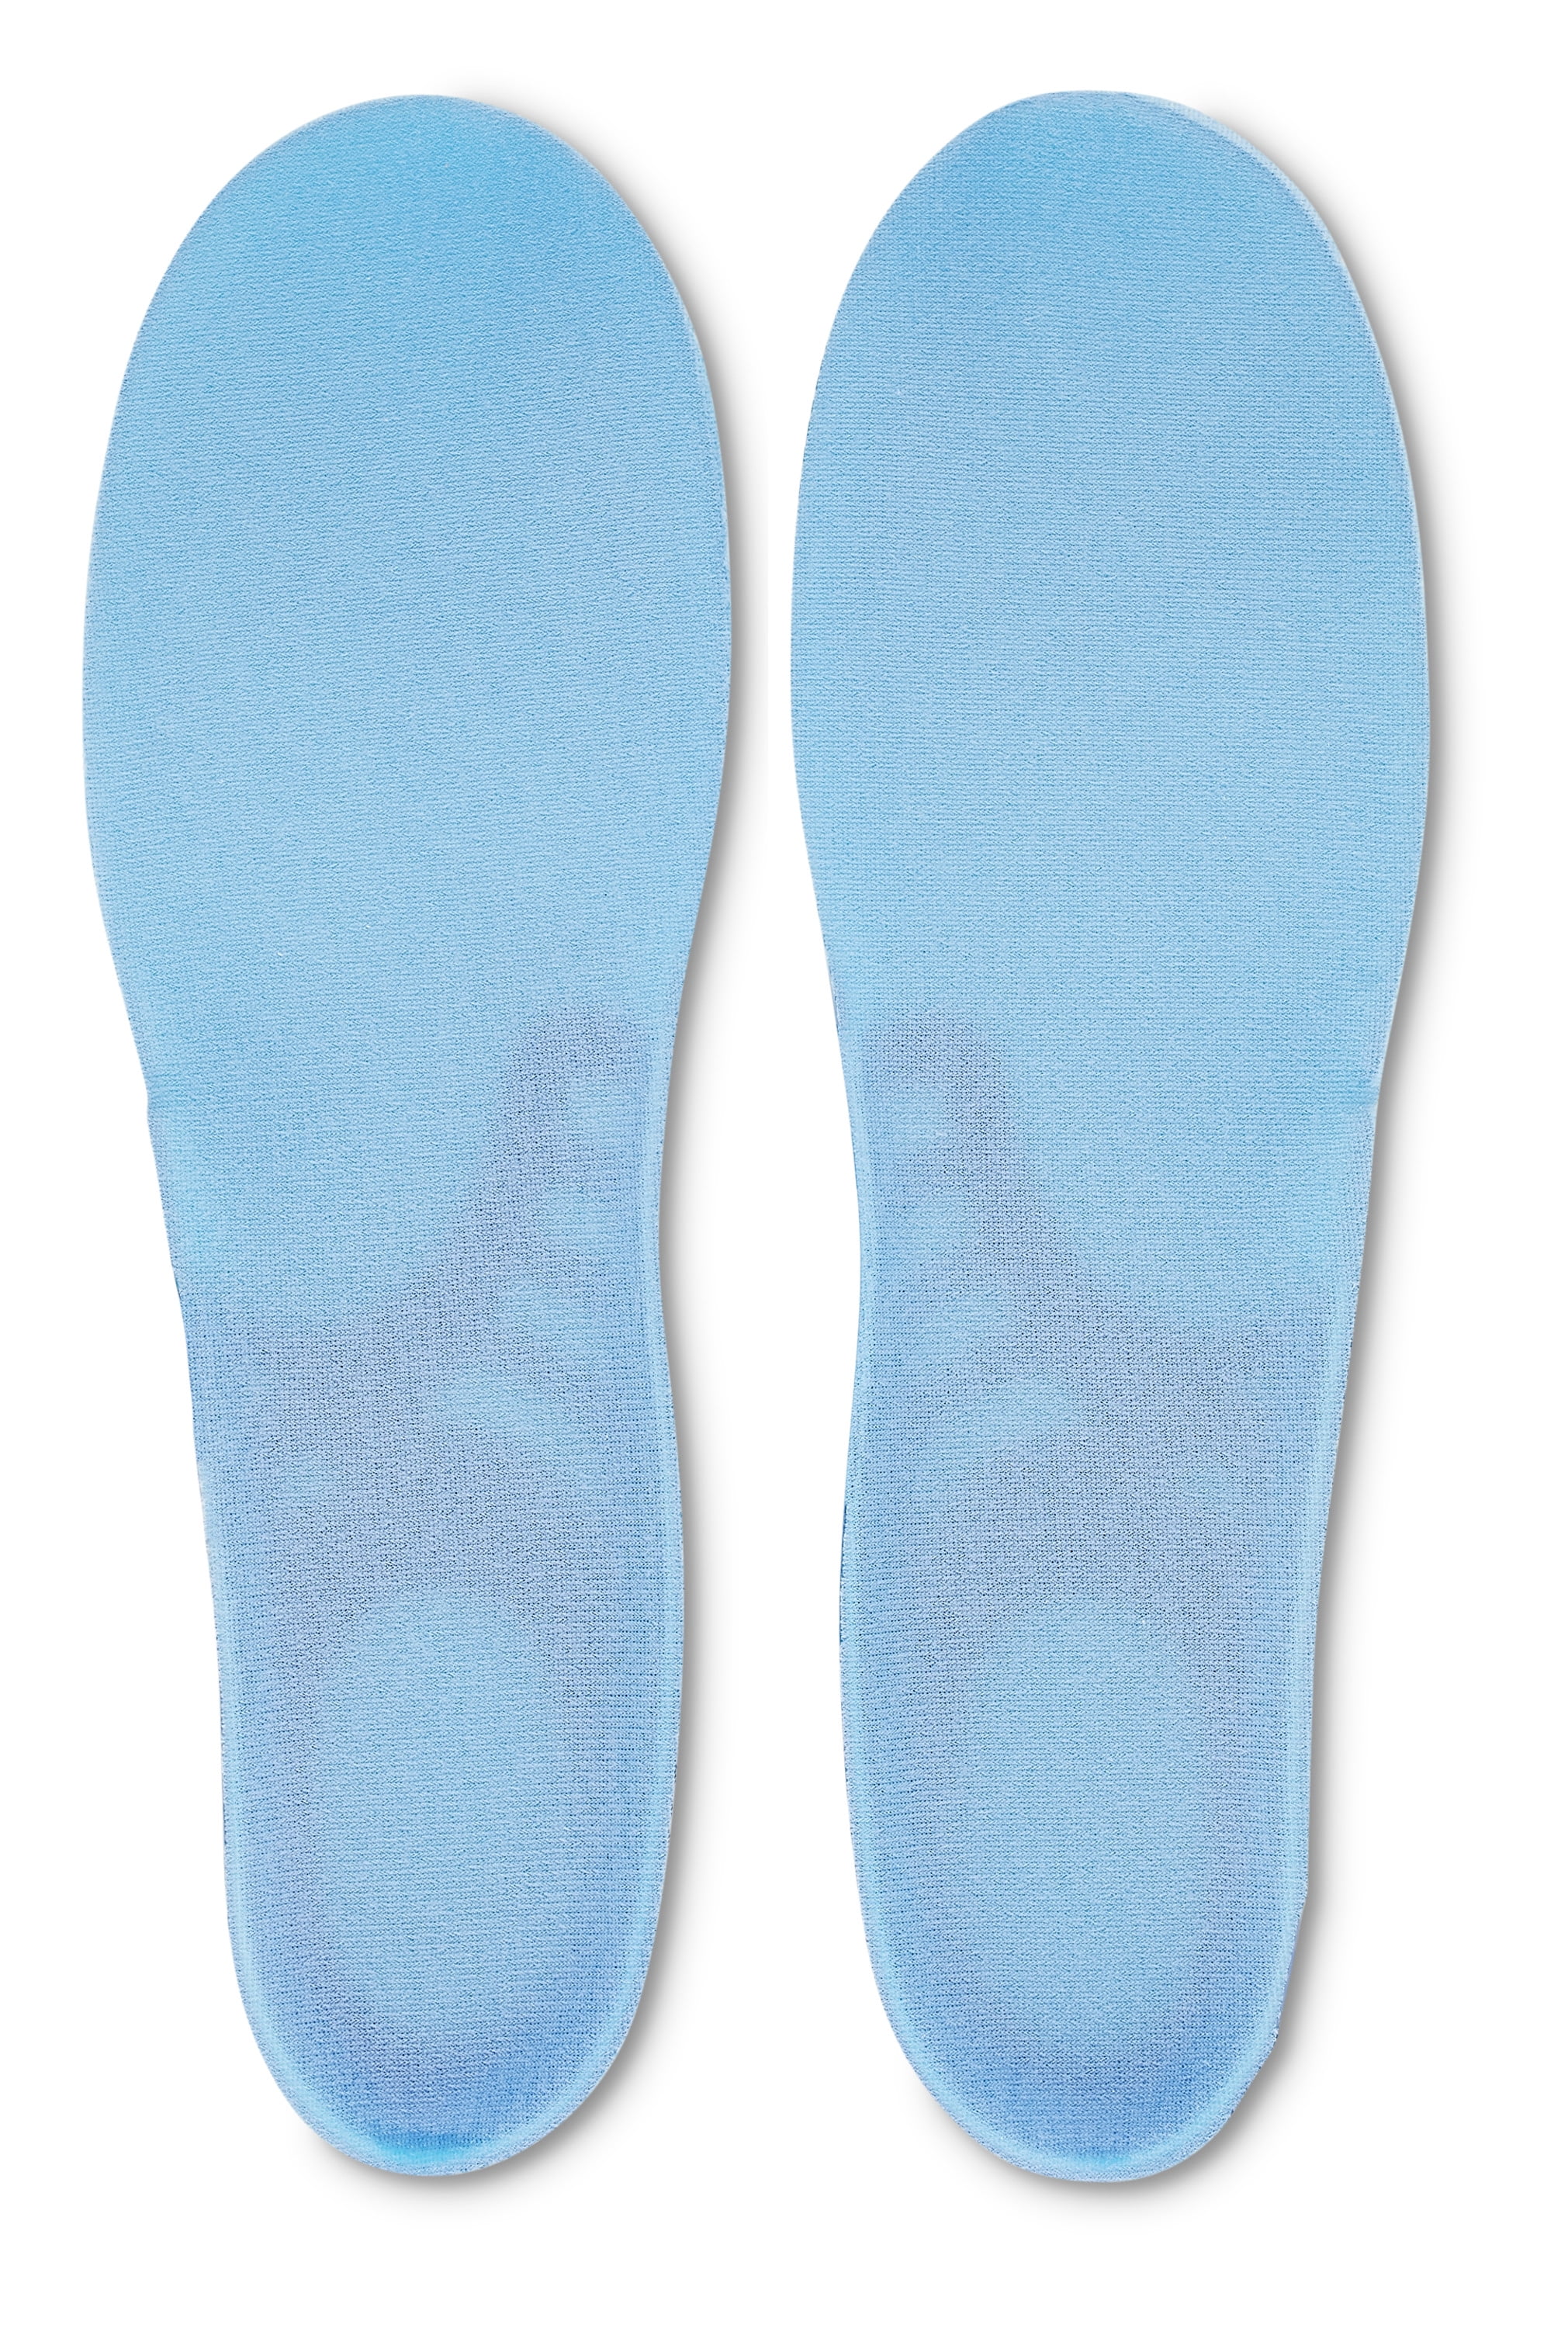 Cushioning Gel Insole One Size Fits 